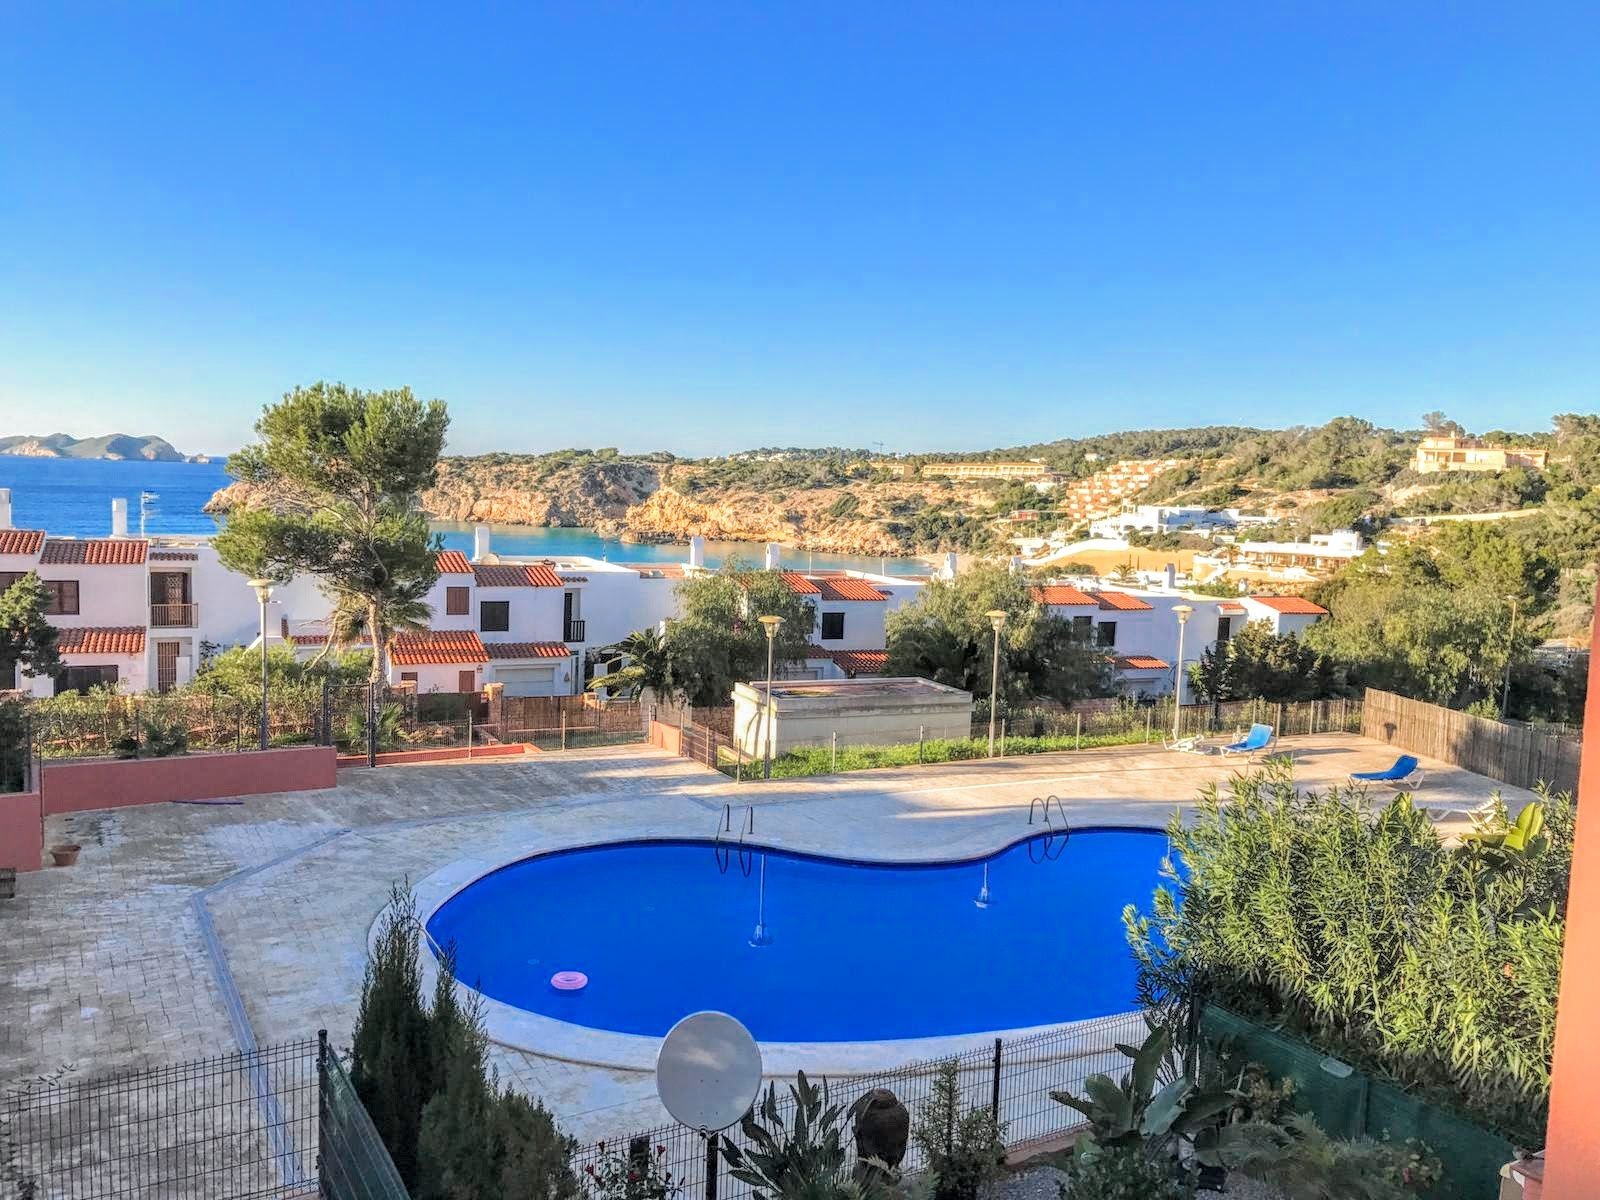 Well maintained apartment in Cala Tarida, right on the beach.